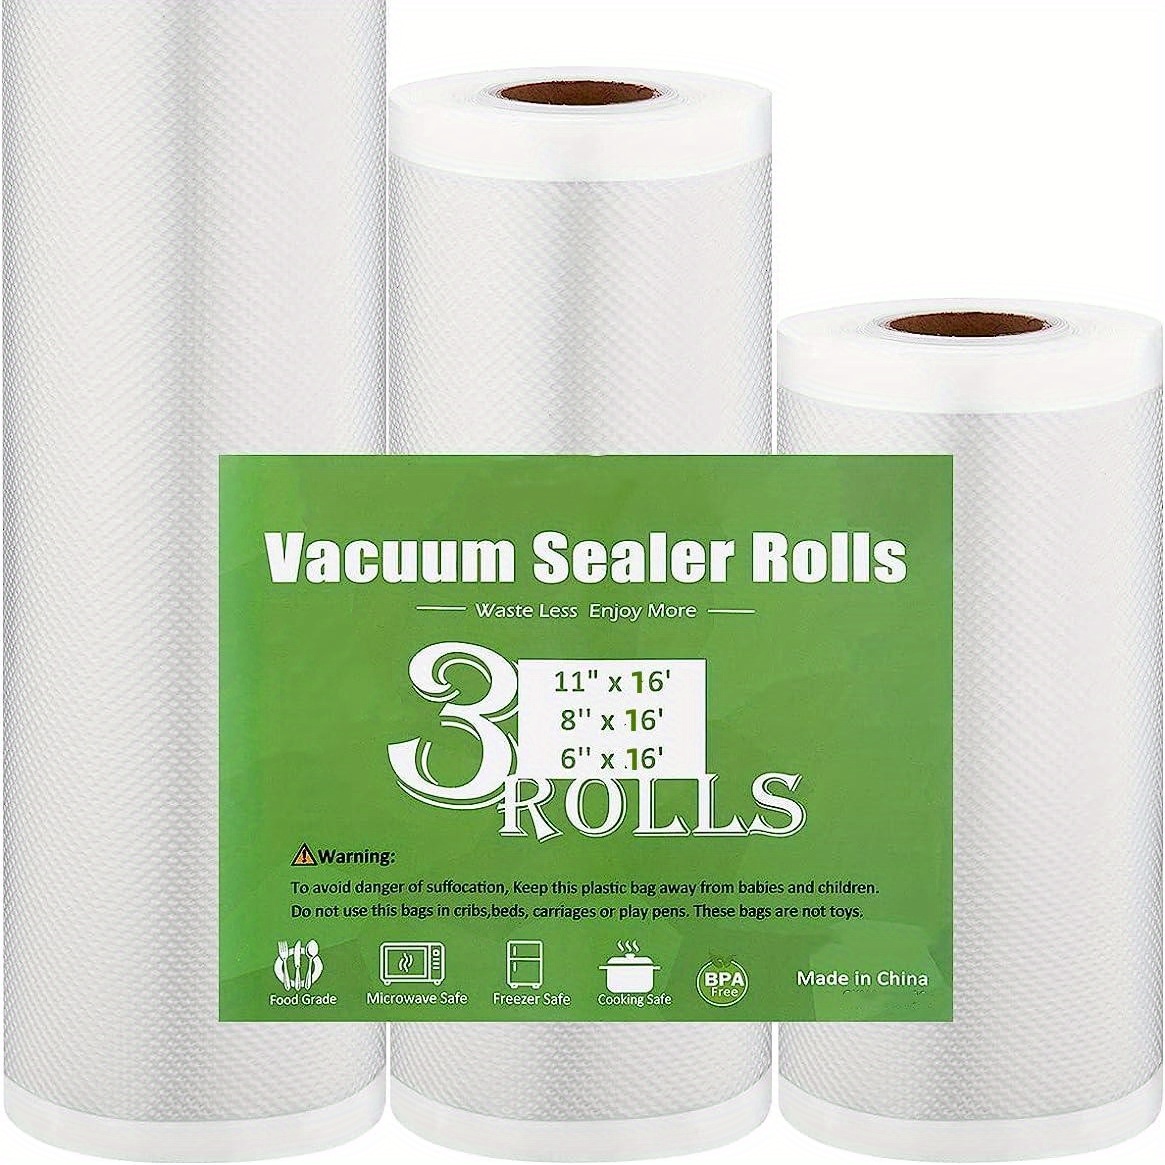 Brand new 48 Pieces 8x16' Vacuum Sealer Bags Rolls for Sale in